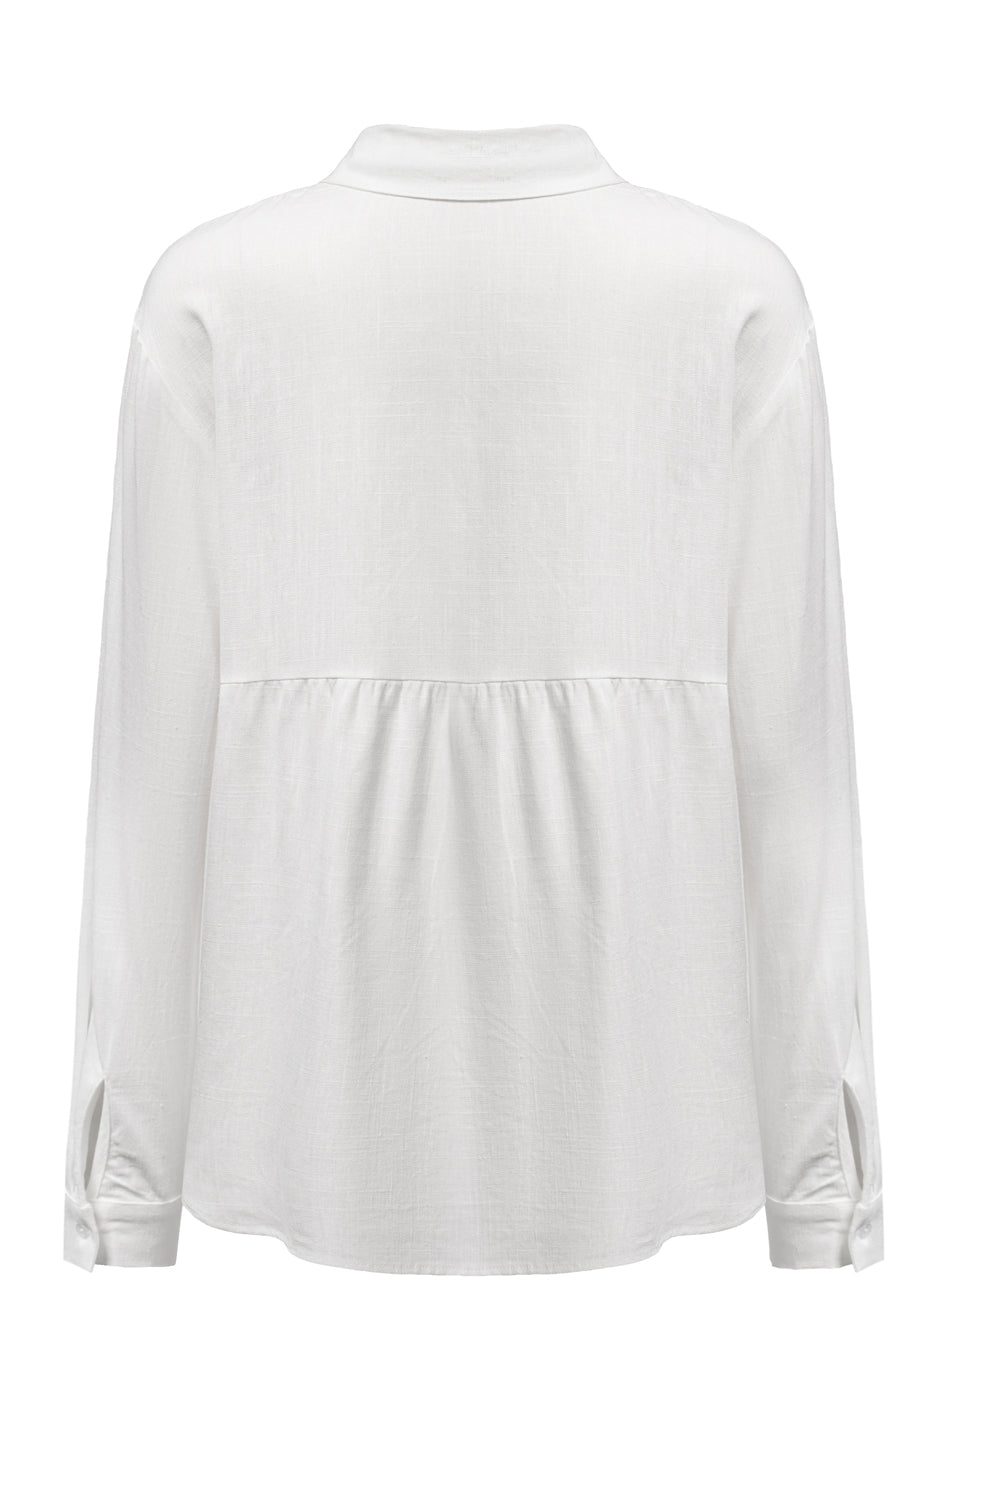 White Long Sleeve Collared Button Up Shirt for Women